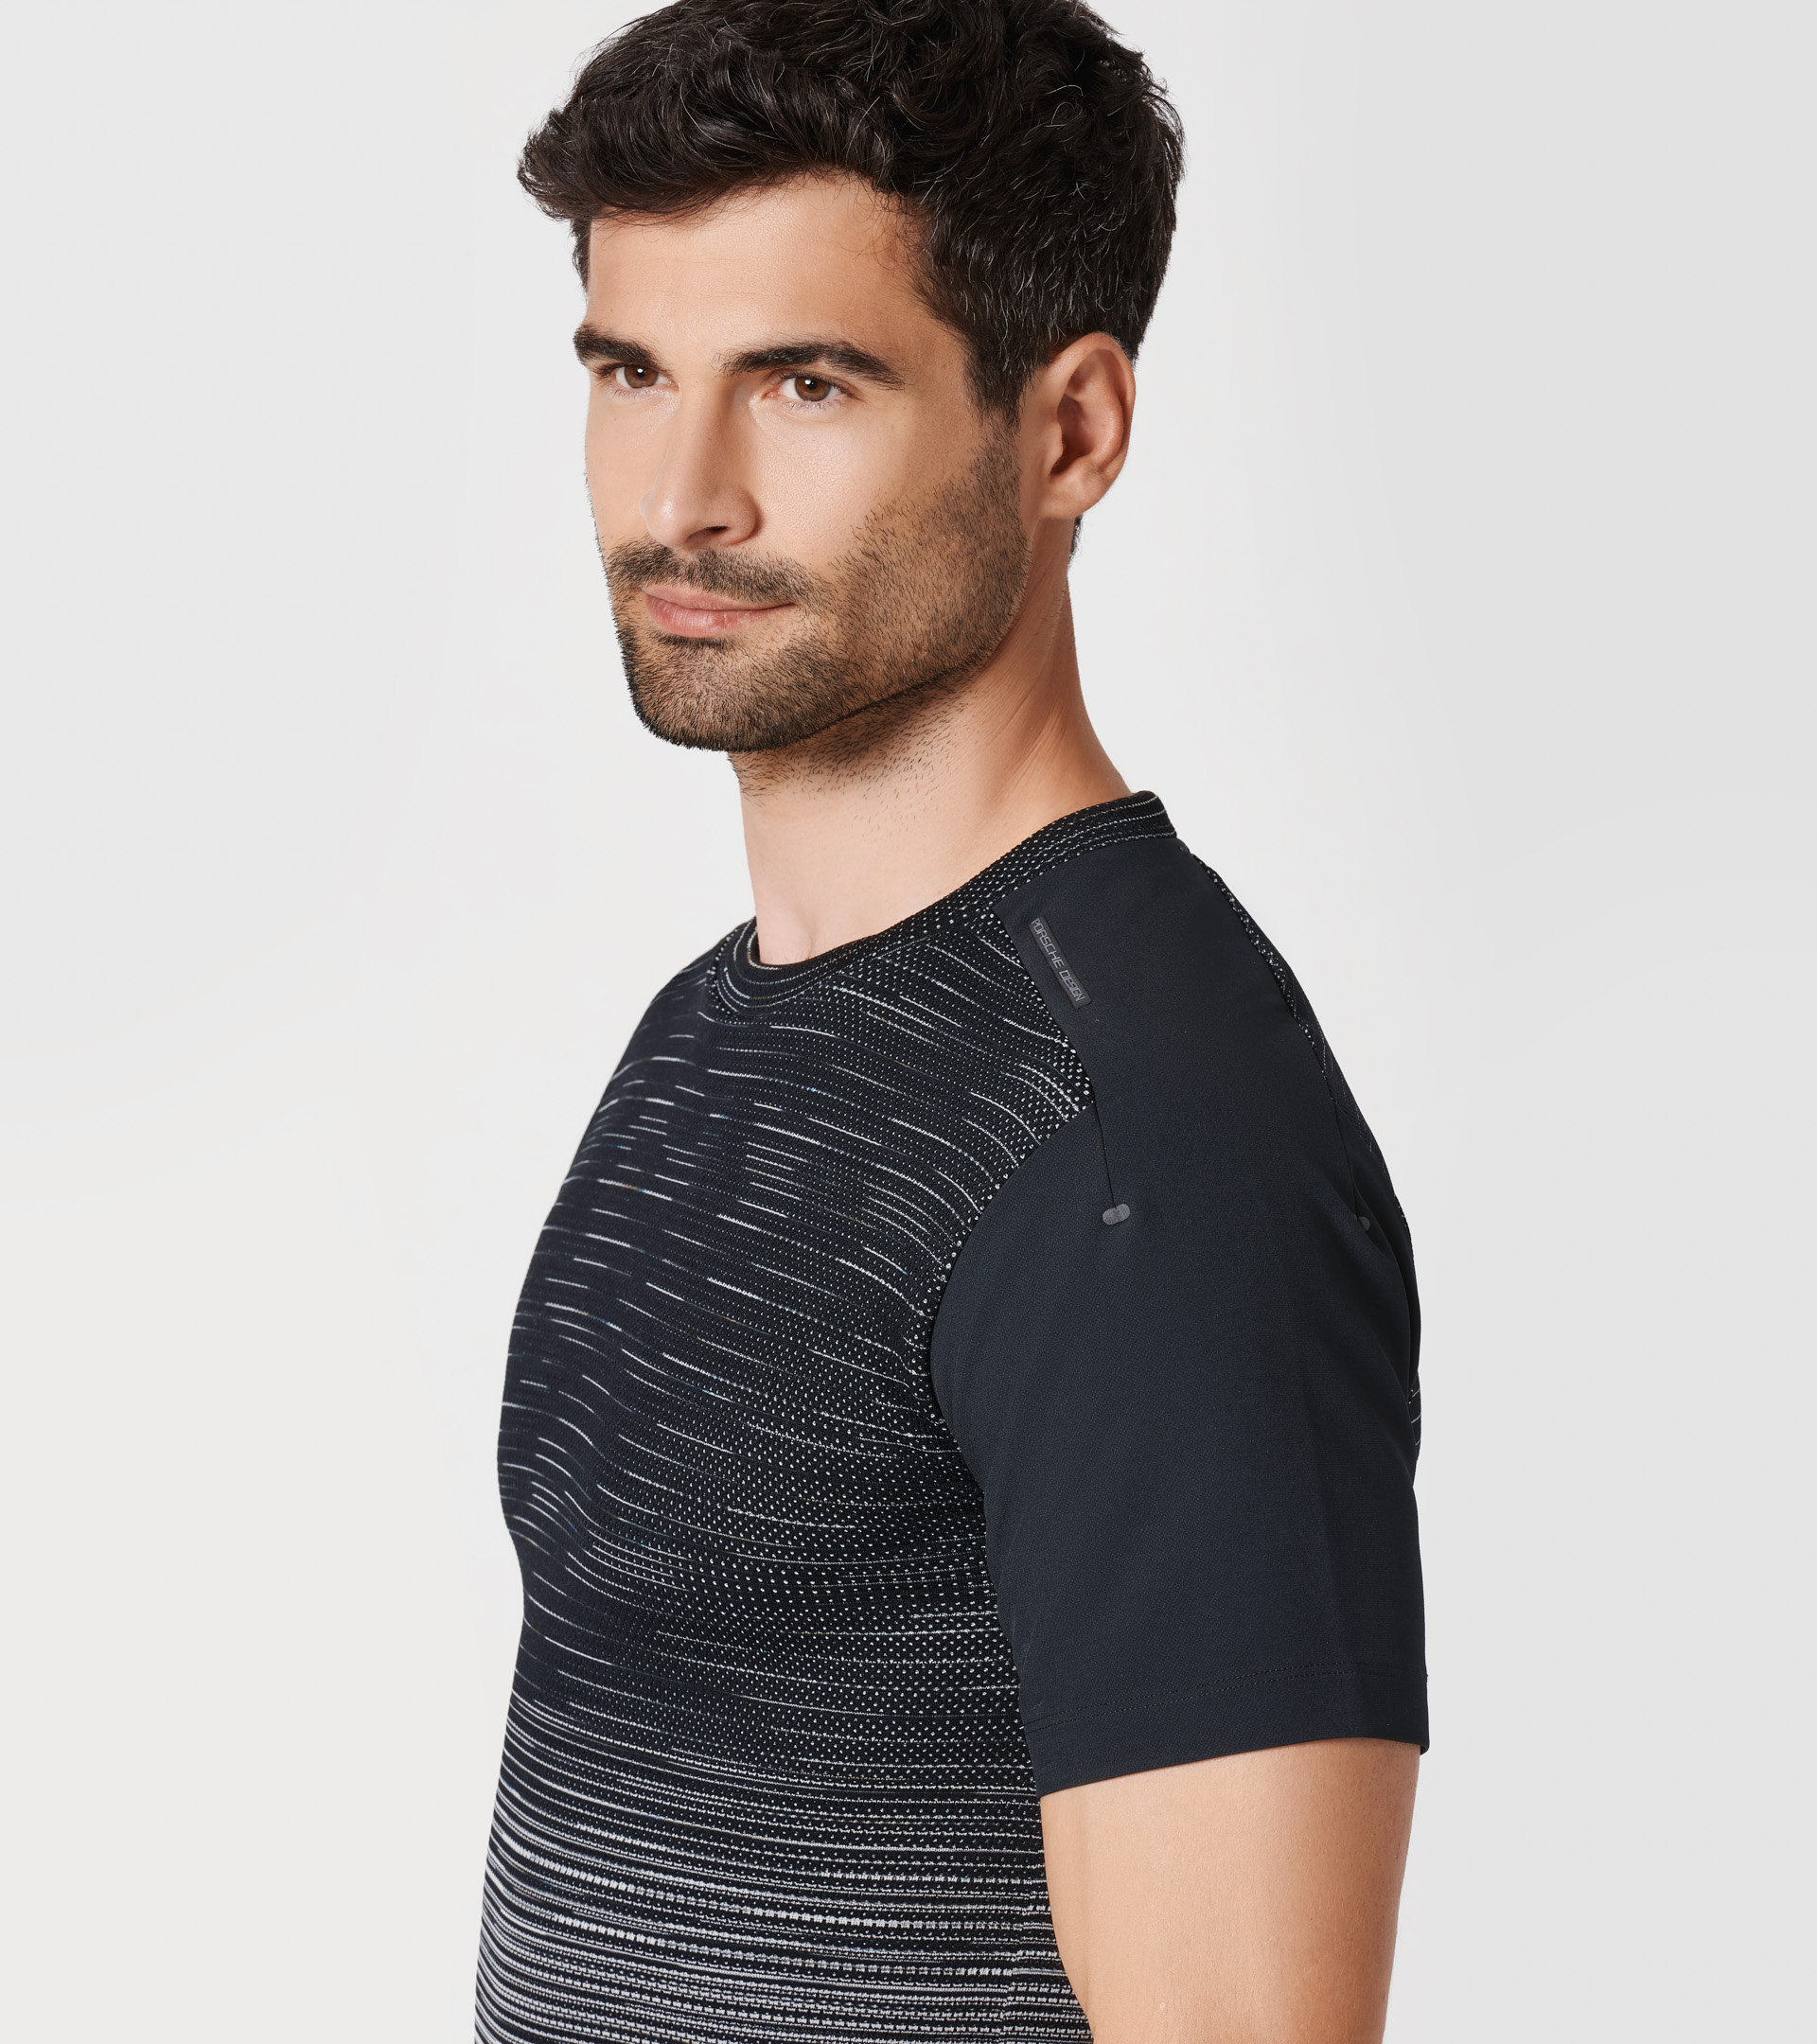 Evoknit T-Shirt - Exclusive Sports Polo & T-Shirts for Men 